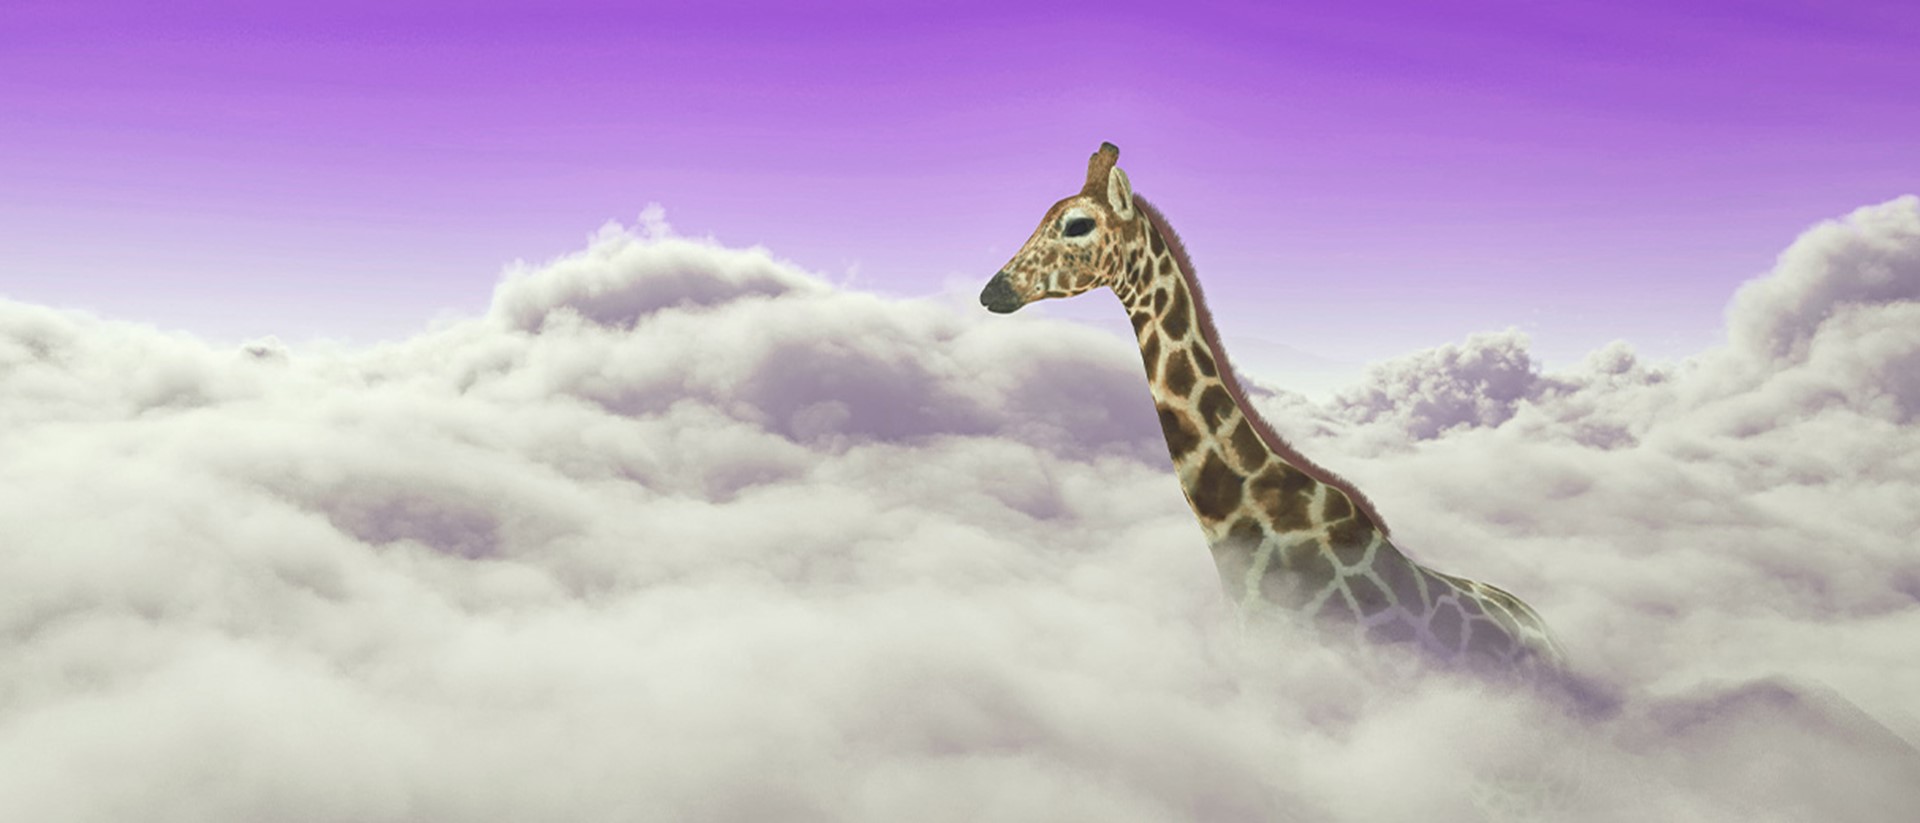 Image of a giraffe poking up through clouds with a purple sky